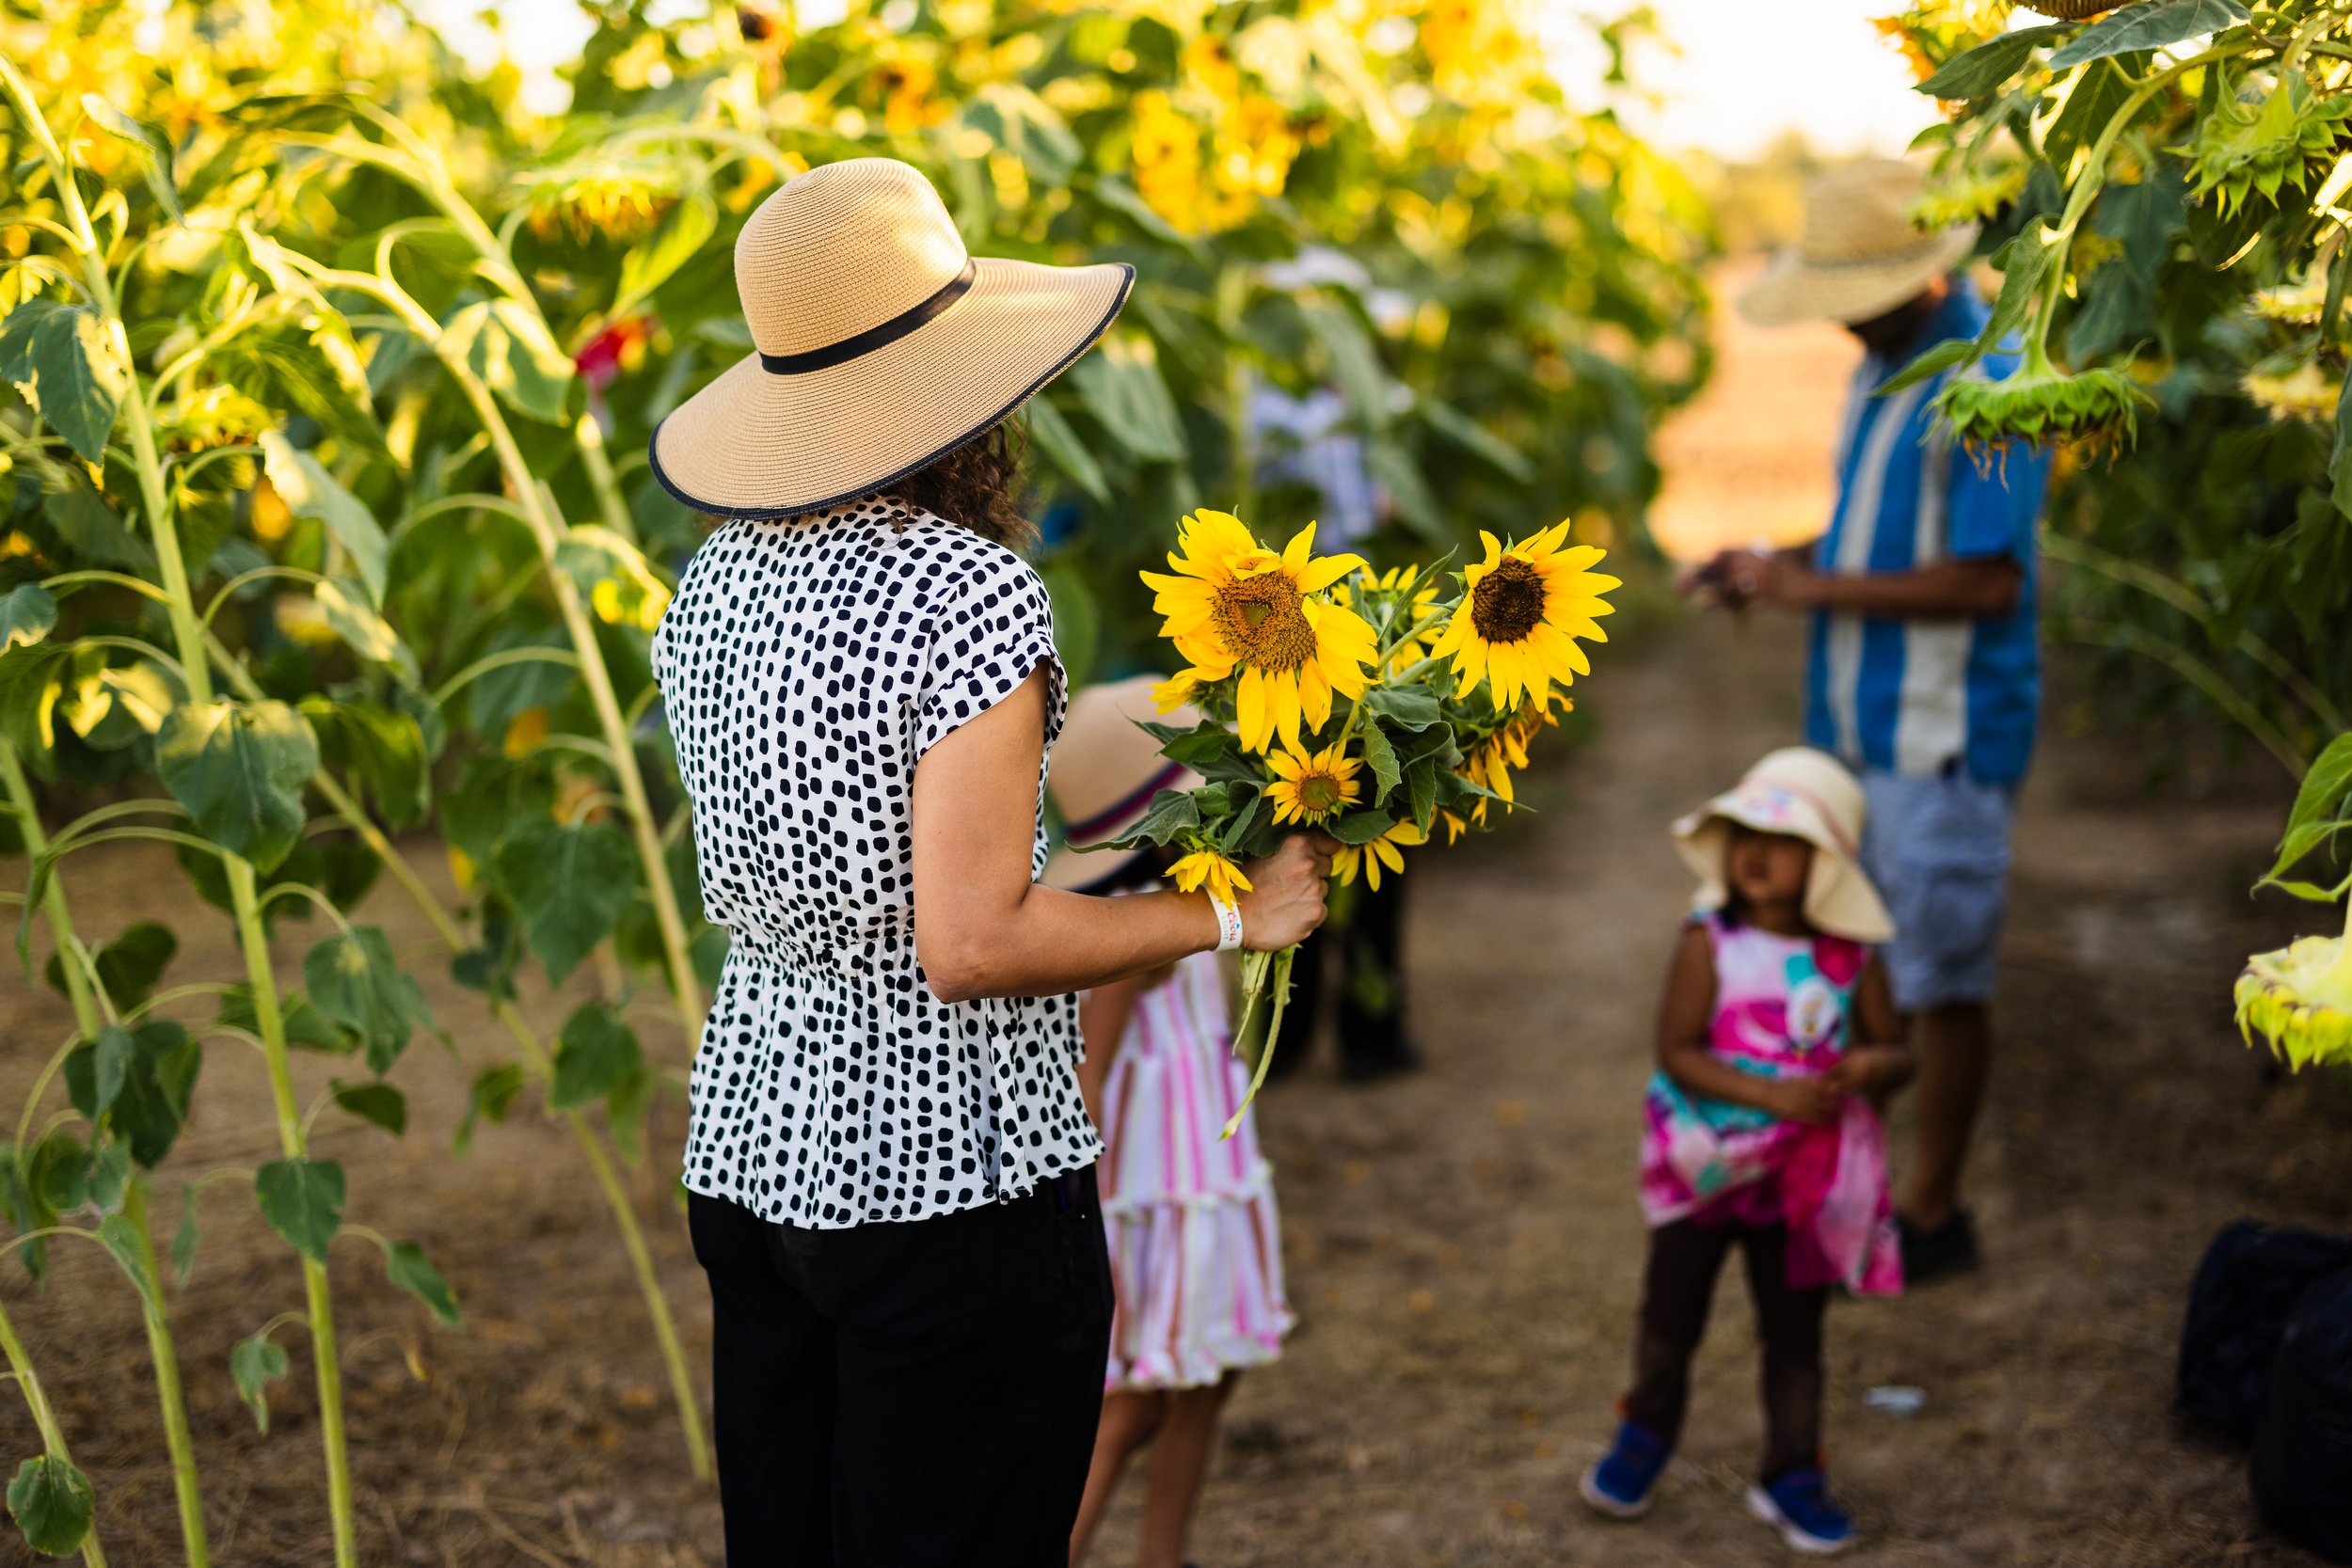  Families gather sunflowers from the sunflower field 